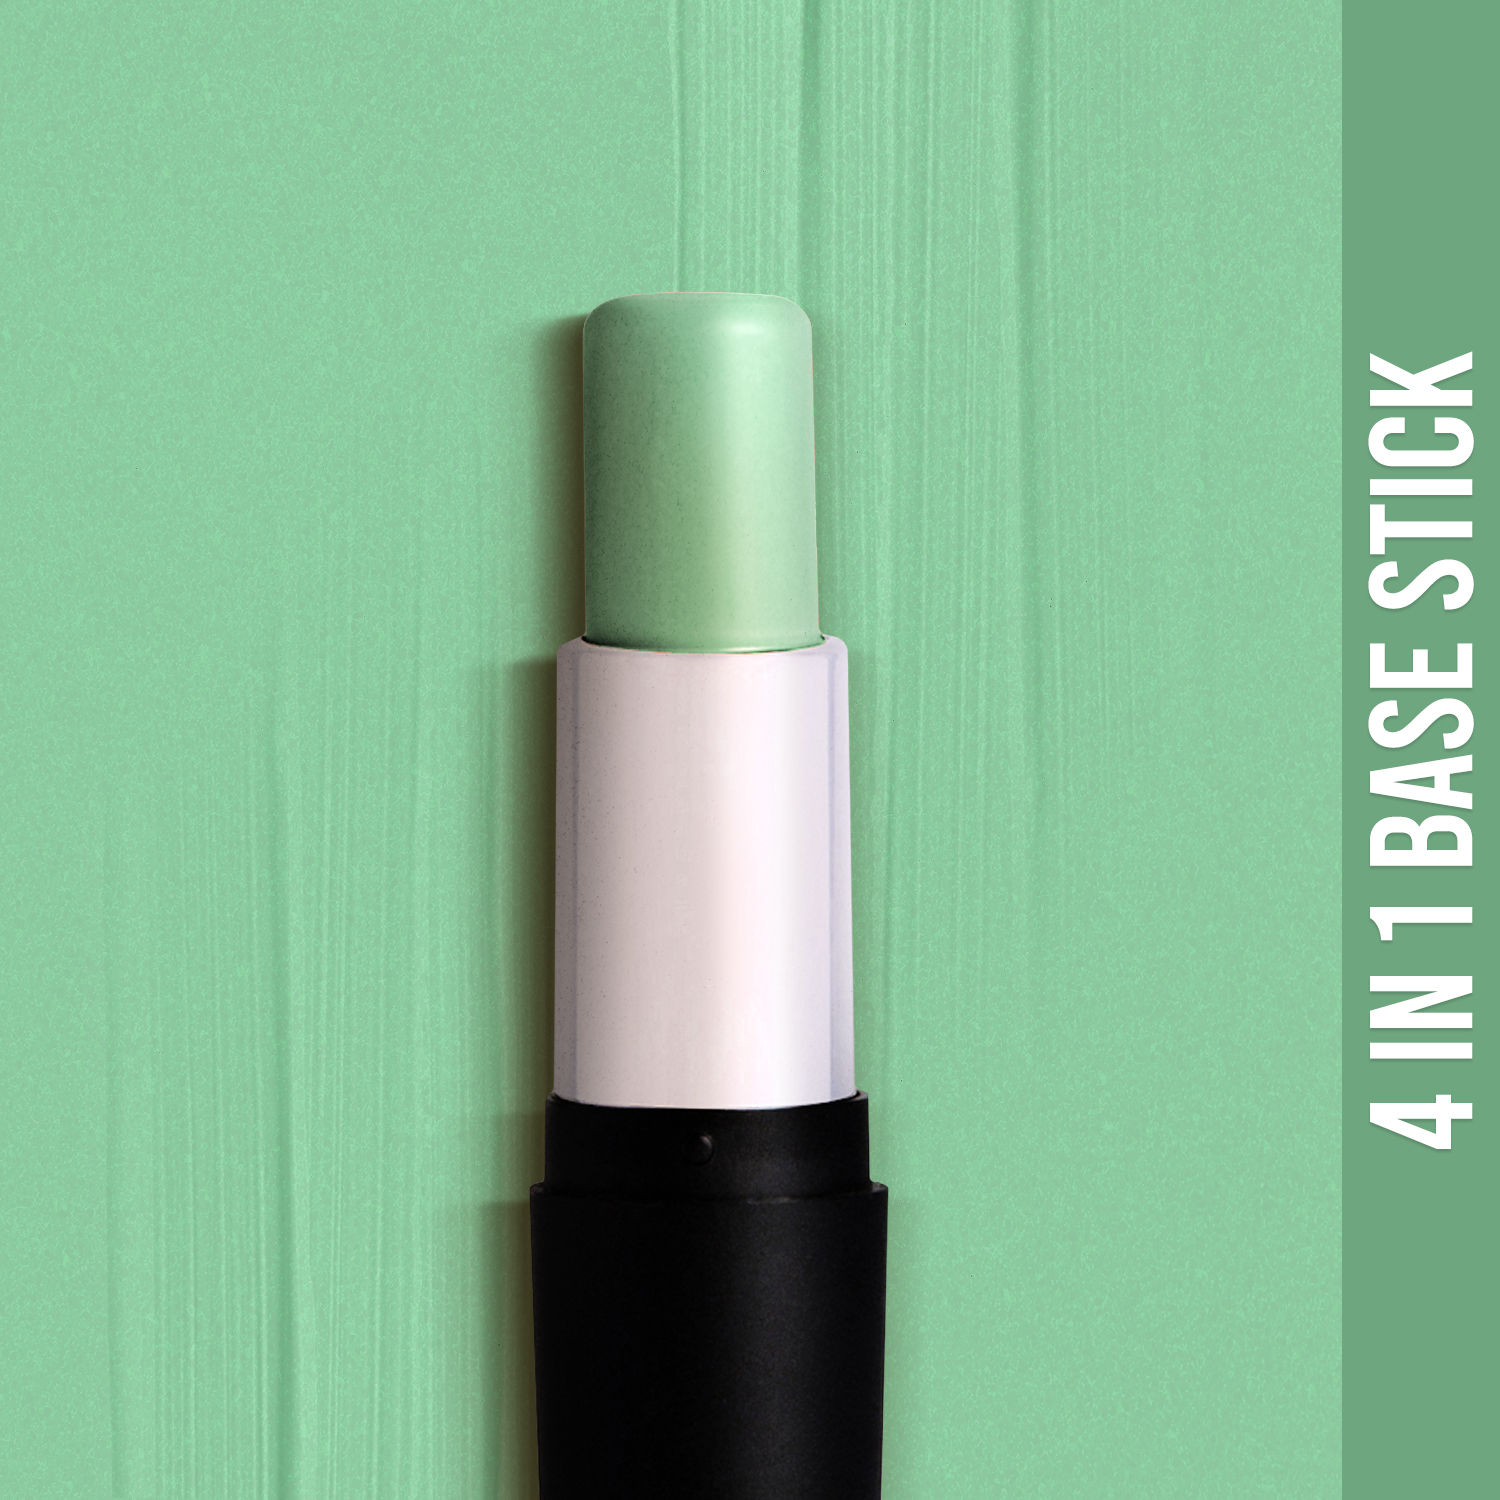 Buy NY Bae All In One Stick - Dance With Me On Ellis Island, Green Corrector 9 | Foundation Concealer Contour Colour Corrector Stick | Fair & Wheatish Skin | Creamy Matte Finish | Enriched With Vitamin E | Covers Redness & Blemishes | Cruelty Free - Purplle